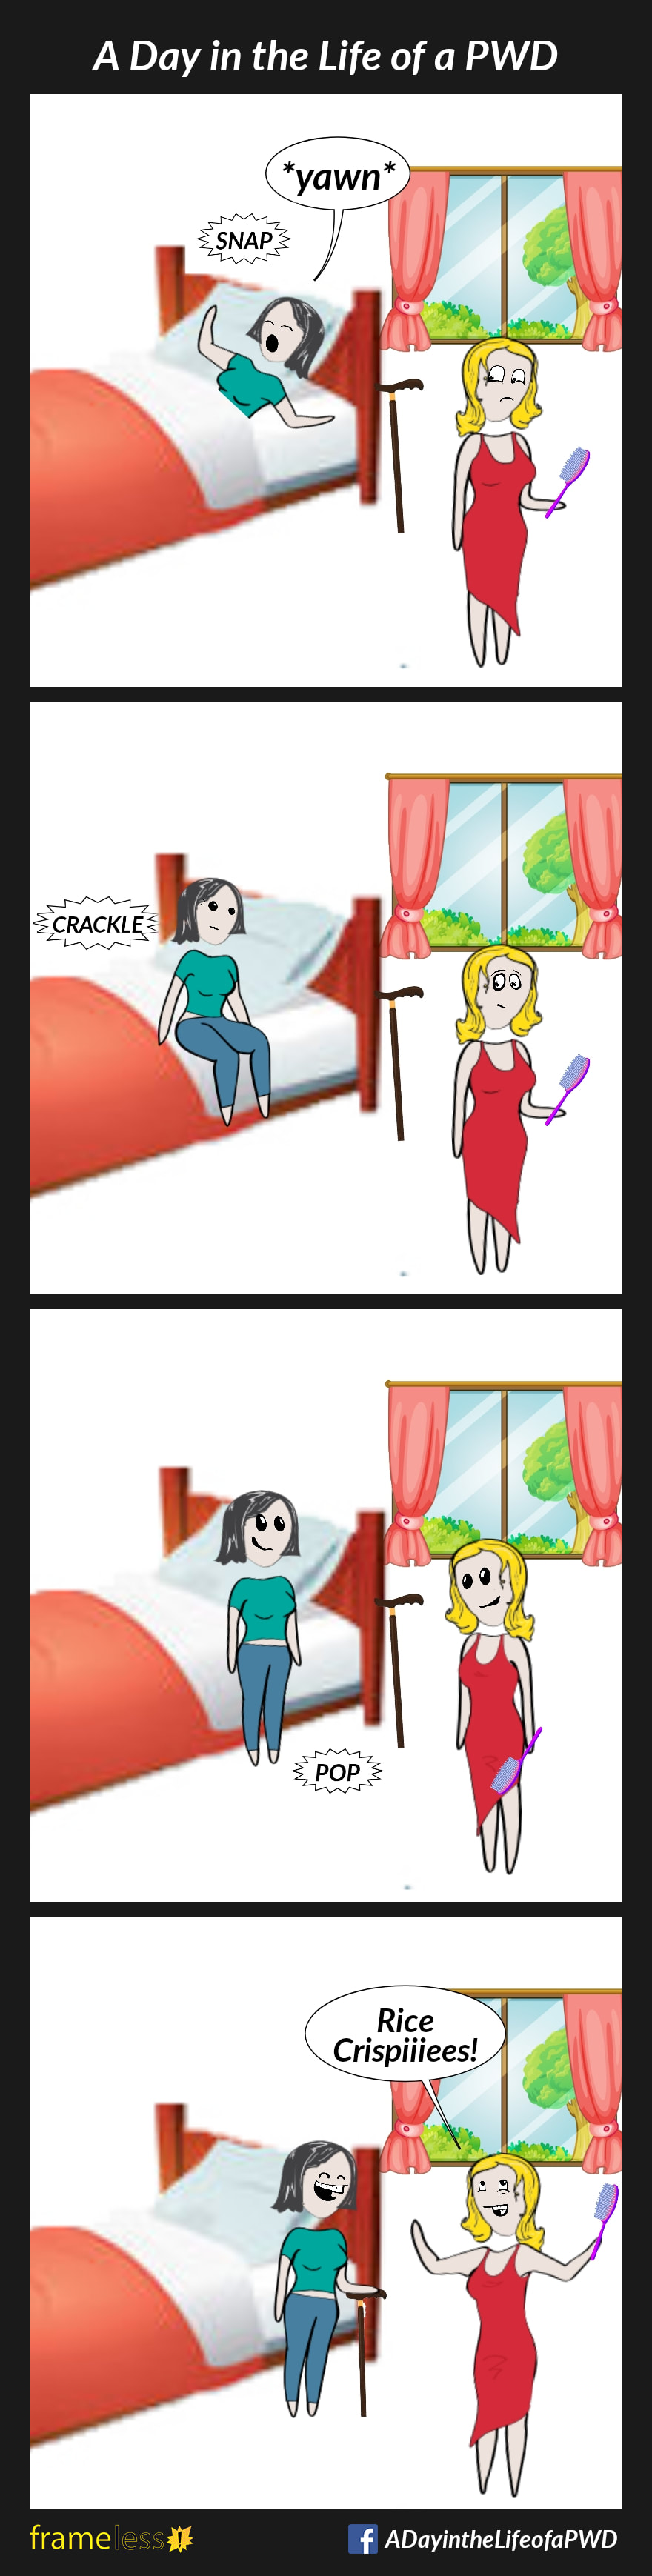 COMIC STRIP 
A Day in the Life of a PWD (Person With a Disability) 

Frame 1:
A woman in bed is just waking up. Her cane is leaning against the bed frame.
She yawns and stretches, and there is an audible 